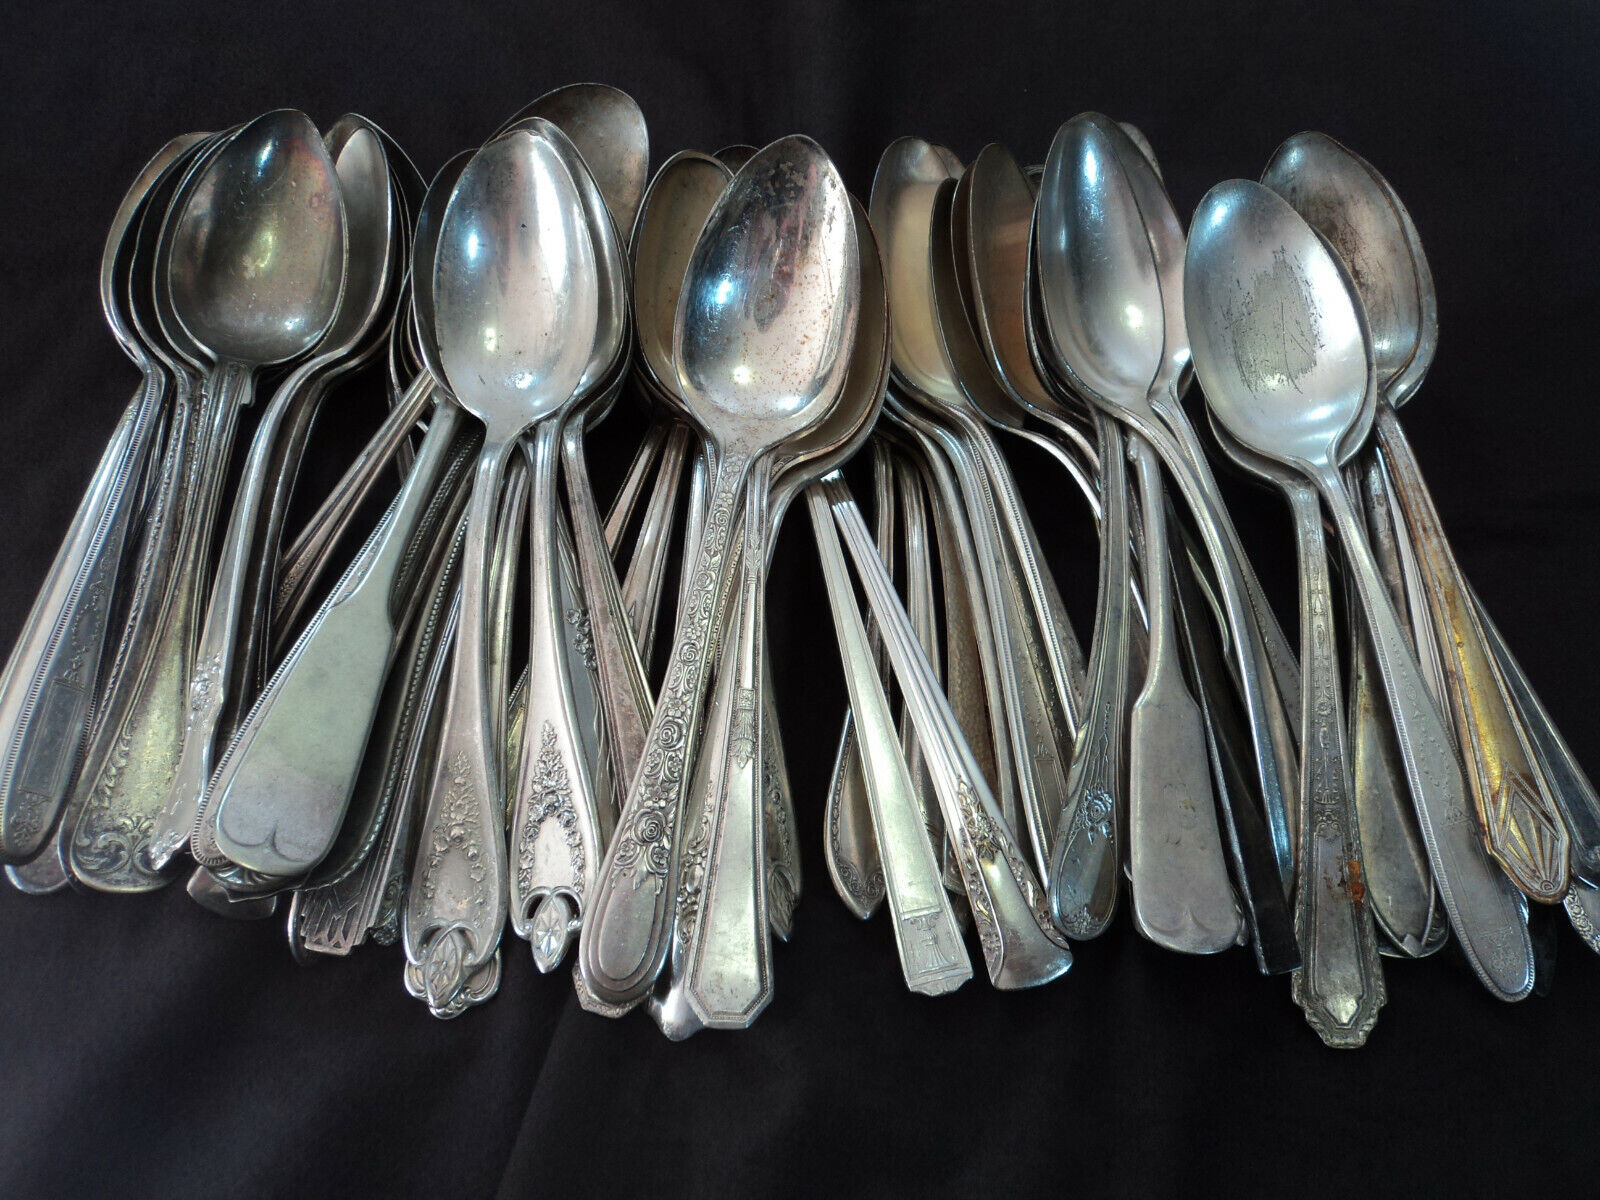 Silverplate OVAL TABLE SERVING SPOON Lot of 100 Craft Use Assorted Flatware 